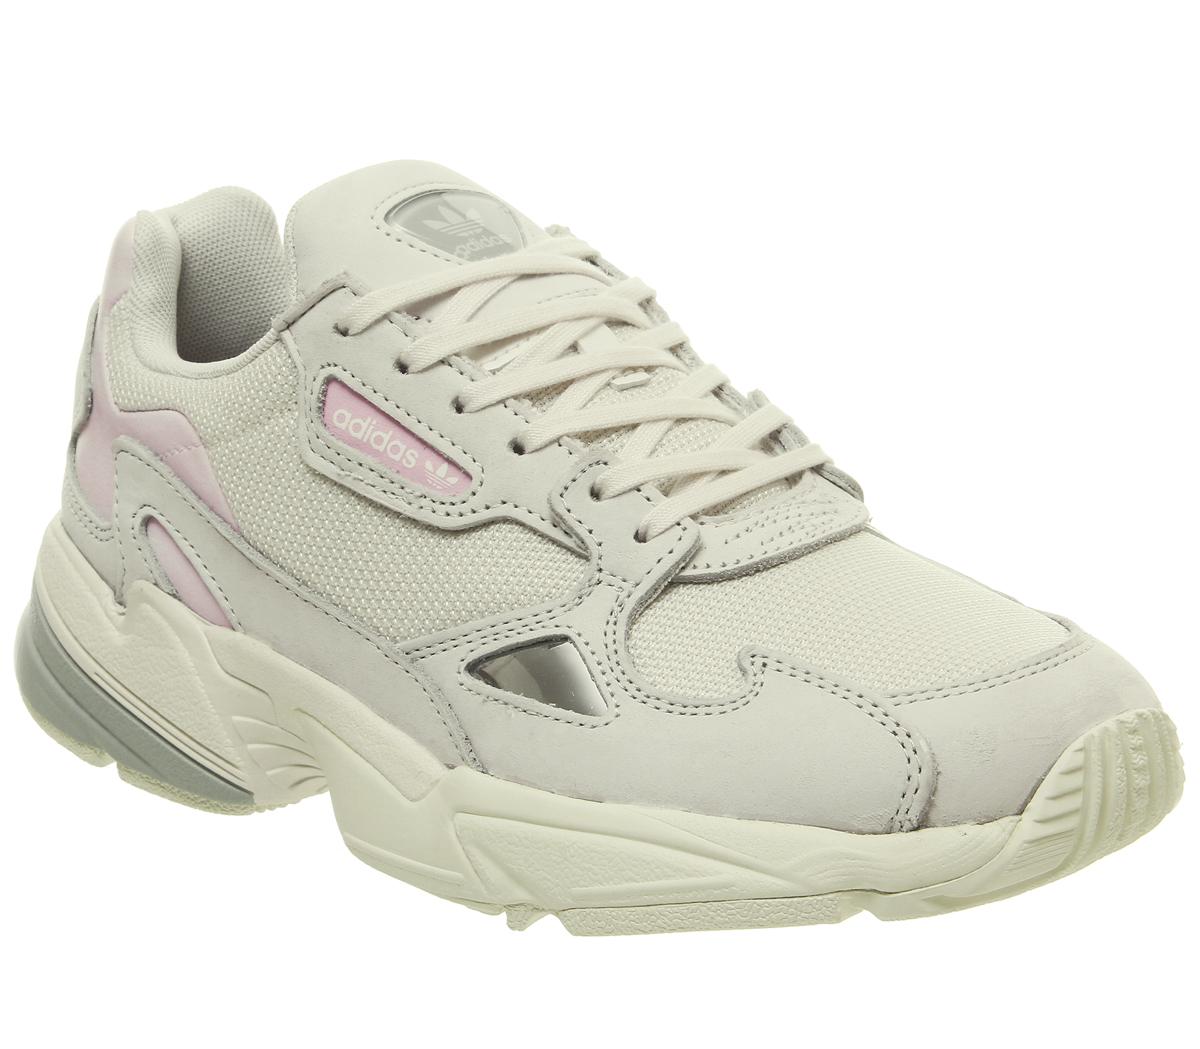 adidas Falcon Trainers Chalk White Grey One Off White Exclusive - Hers  trainers